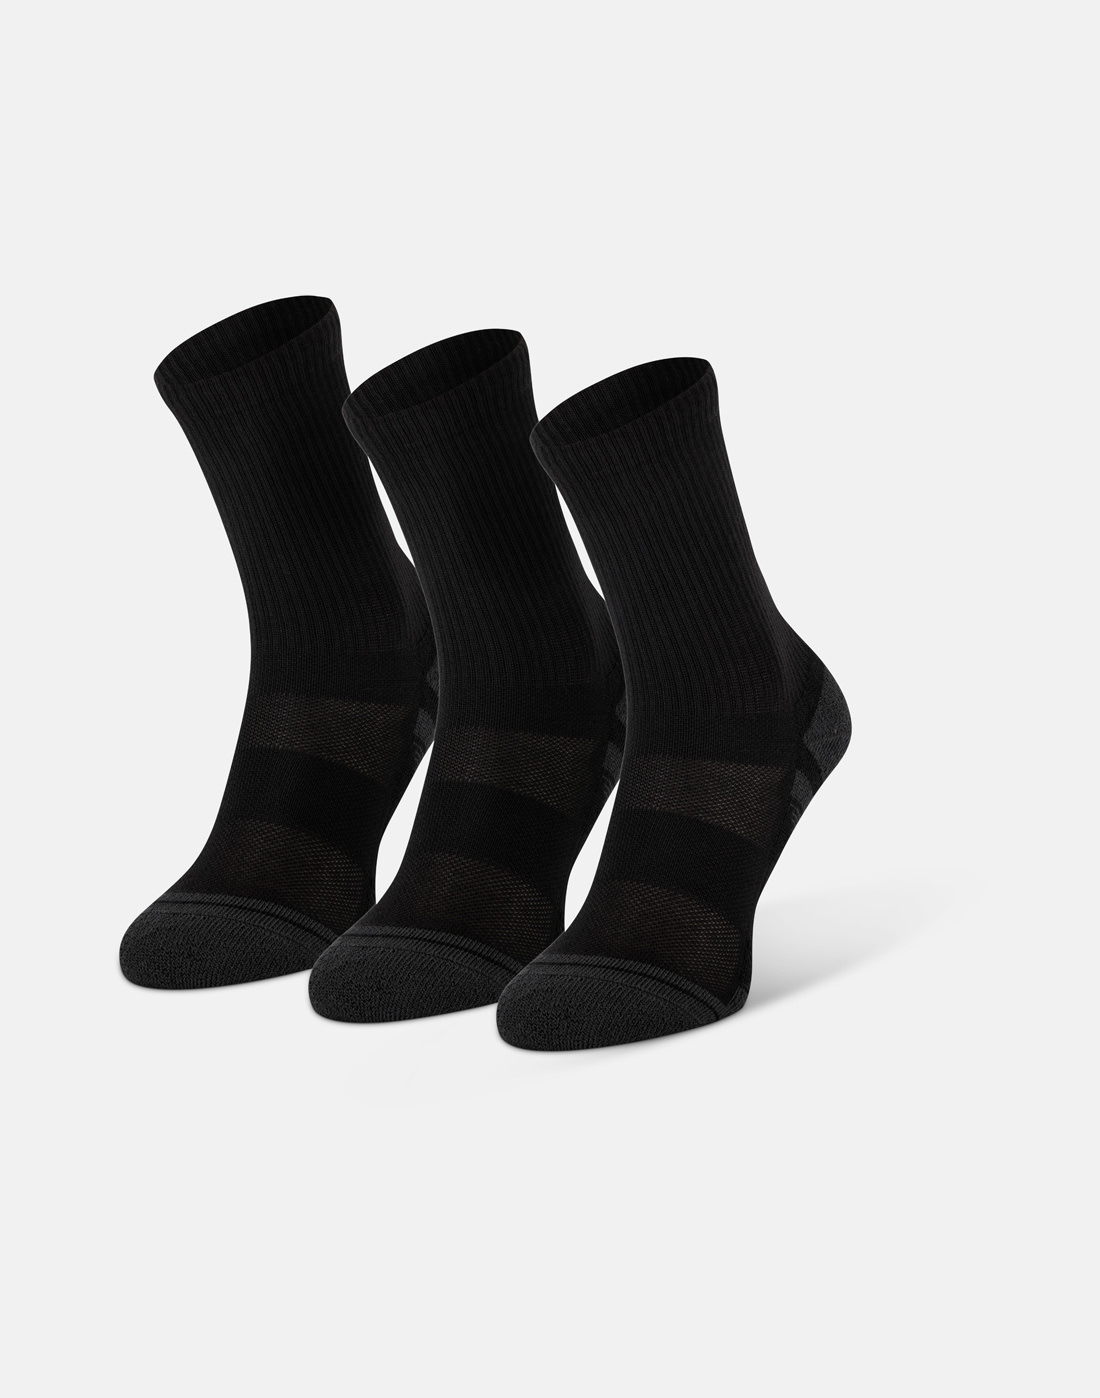 Under Armour Kids Perform Tech 3 Pack Socks - Black | Life Style Sports IE